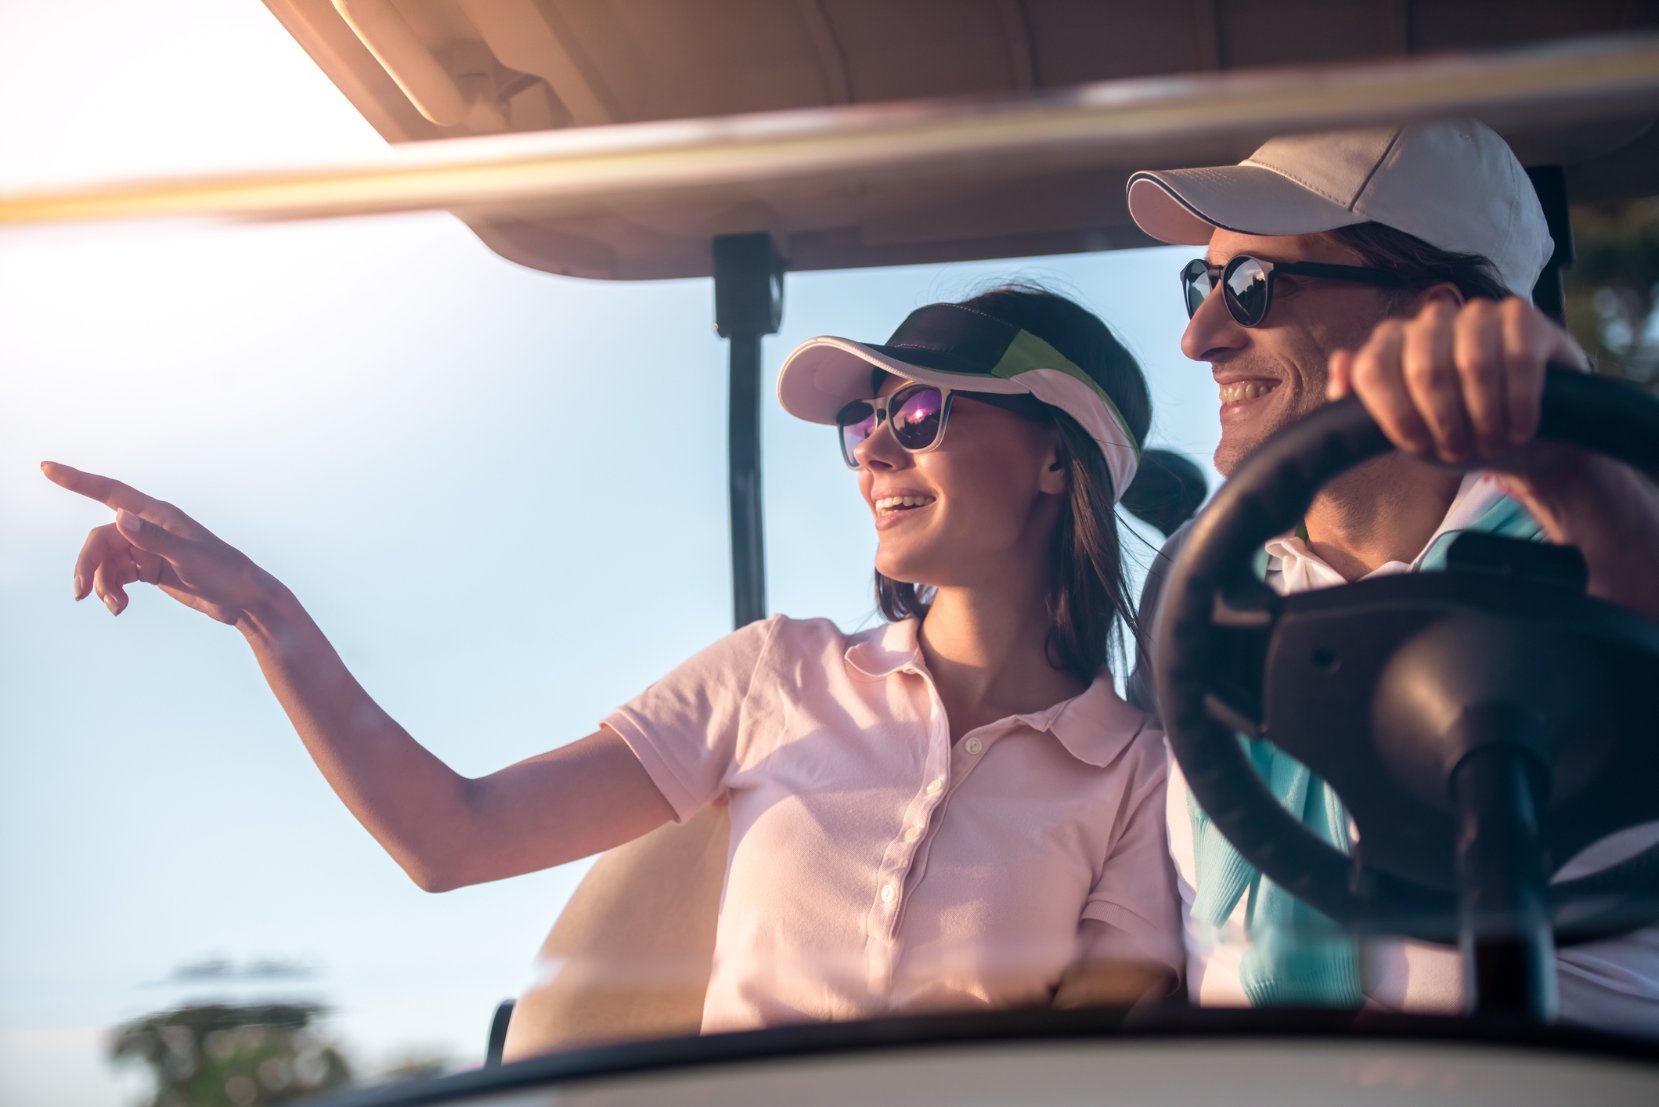 Smiling man and woman in a golf cart pointing at something